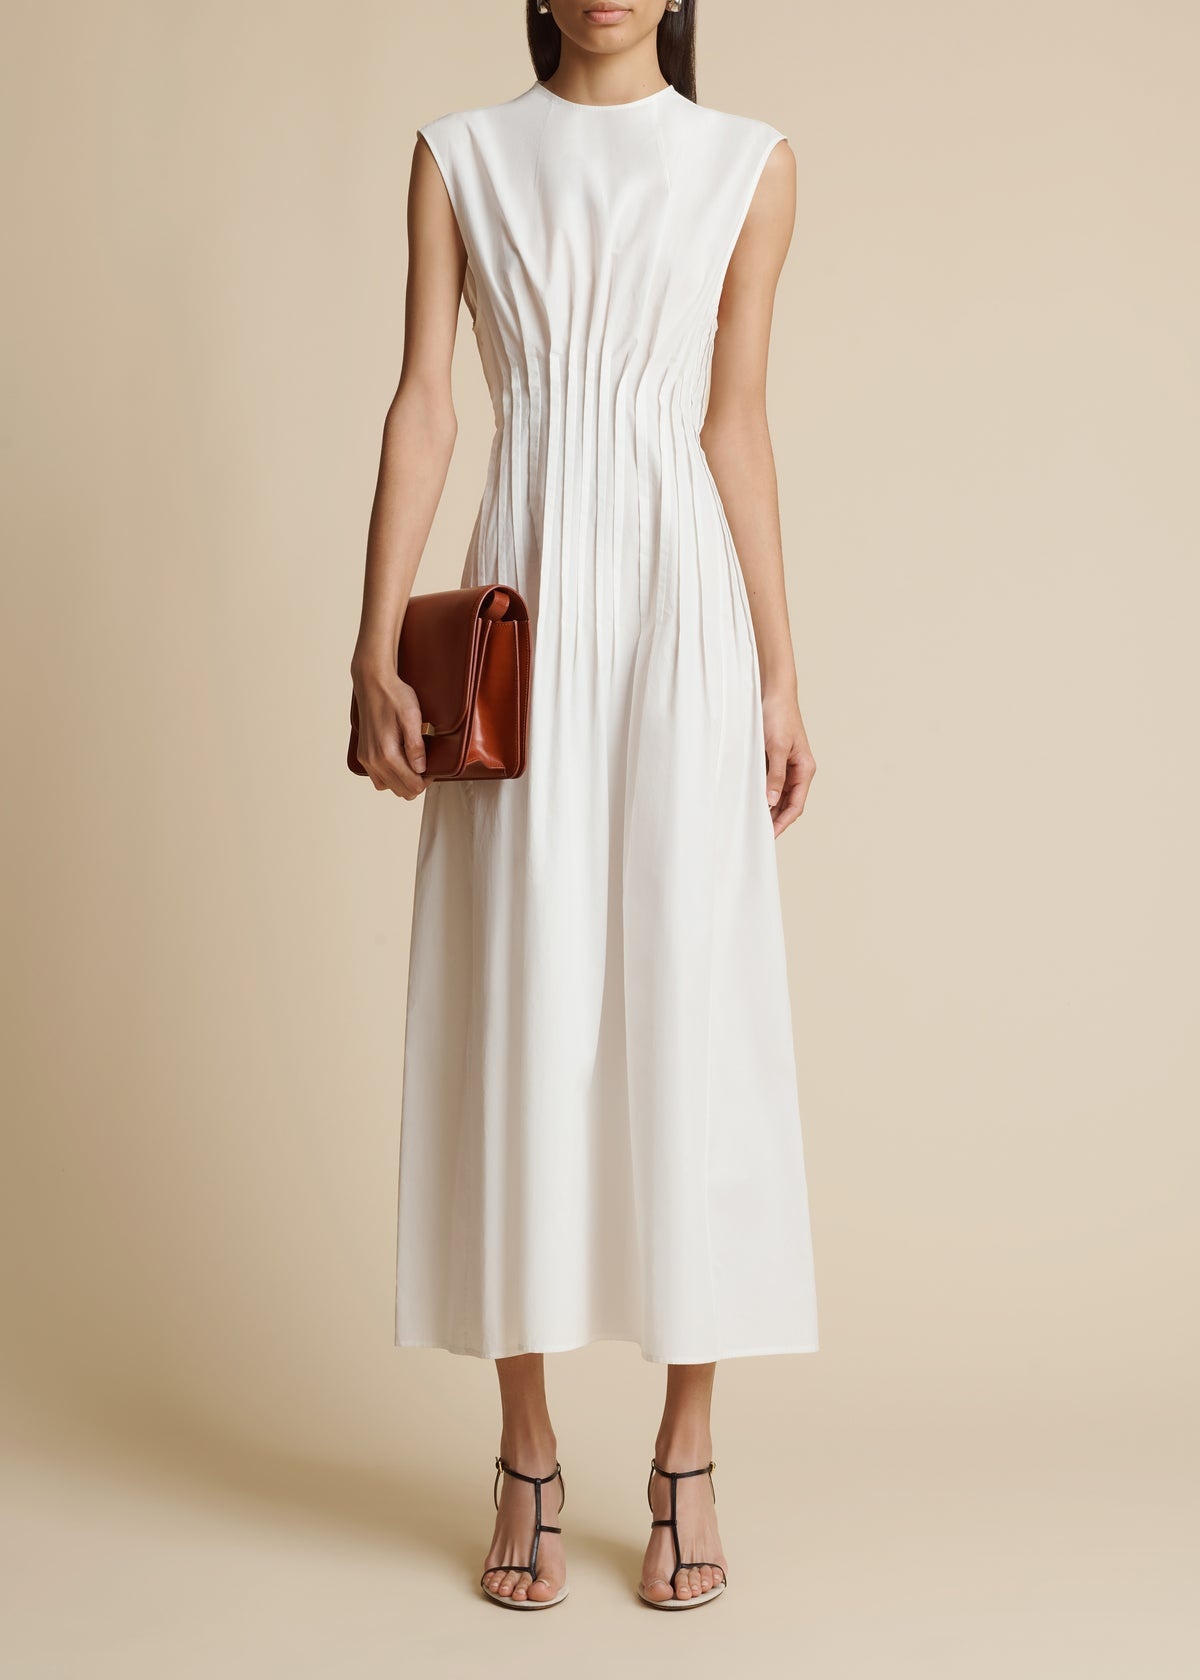 The Wes Dress in White - 1